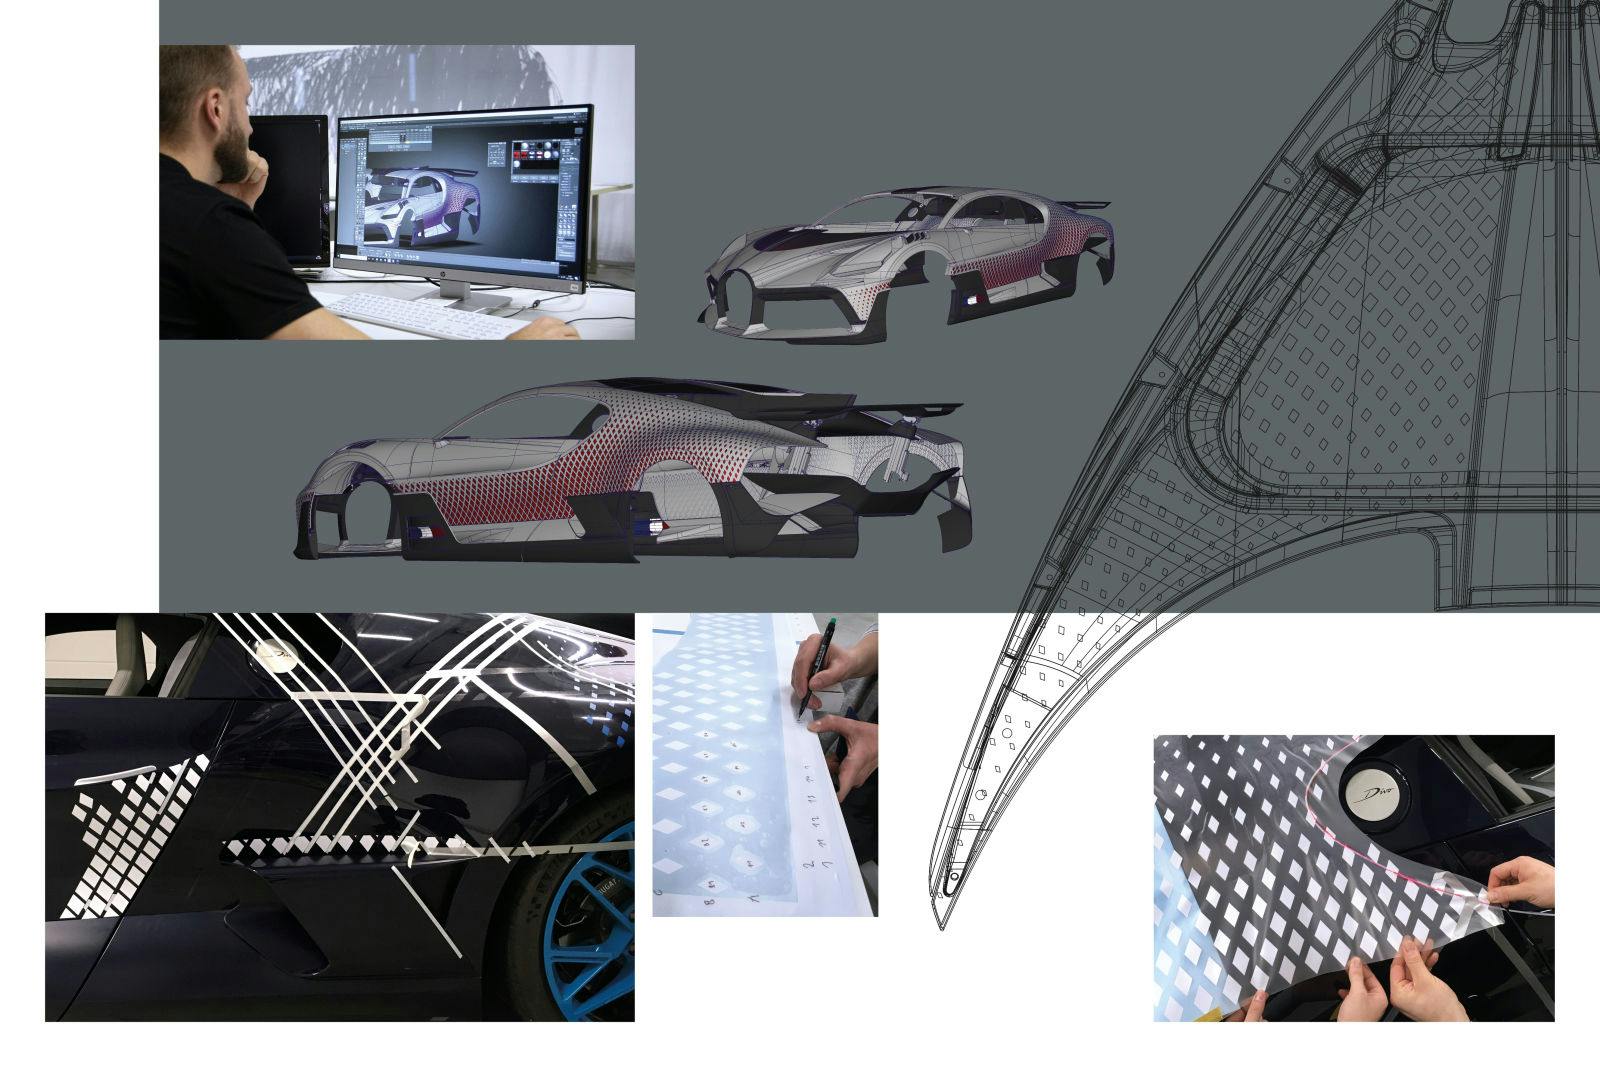 The Bugatti CAD-modellers projected according to the photoshop-specification of the designer the diamond pattern onto the surface of the CAD model of the Divo.